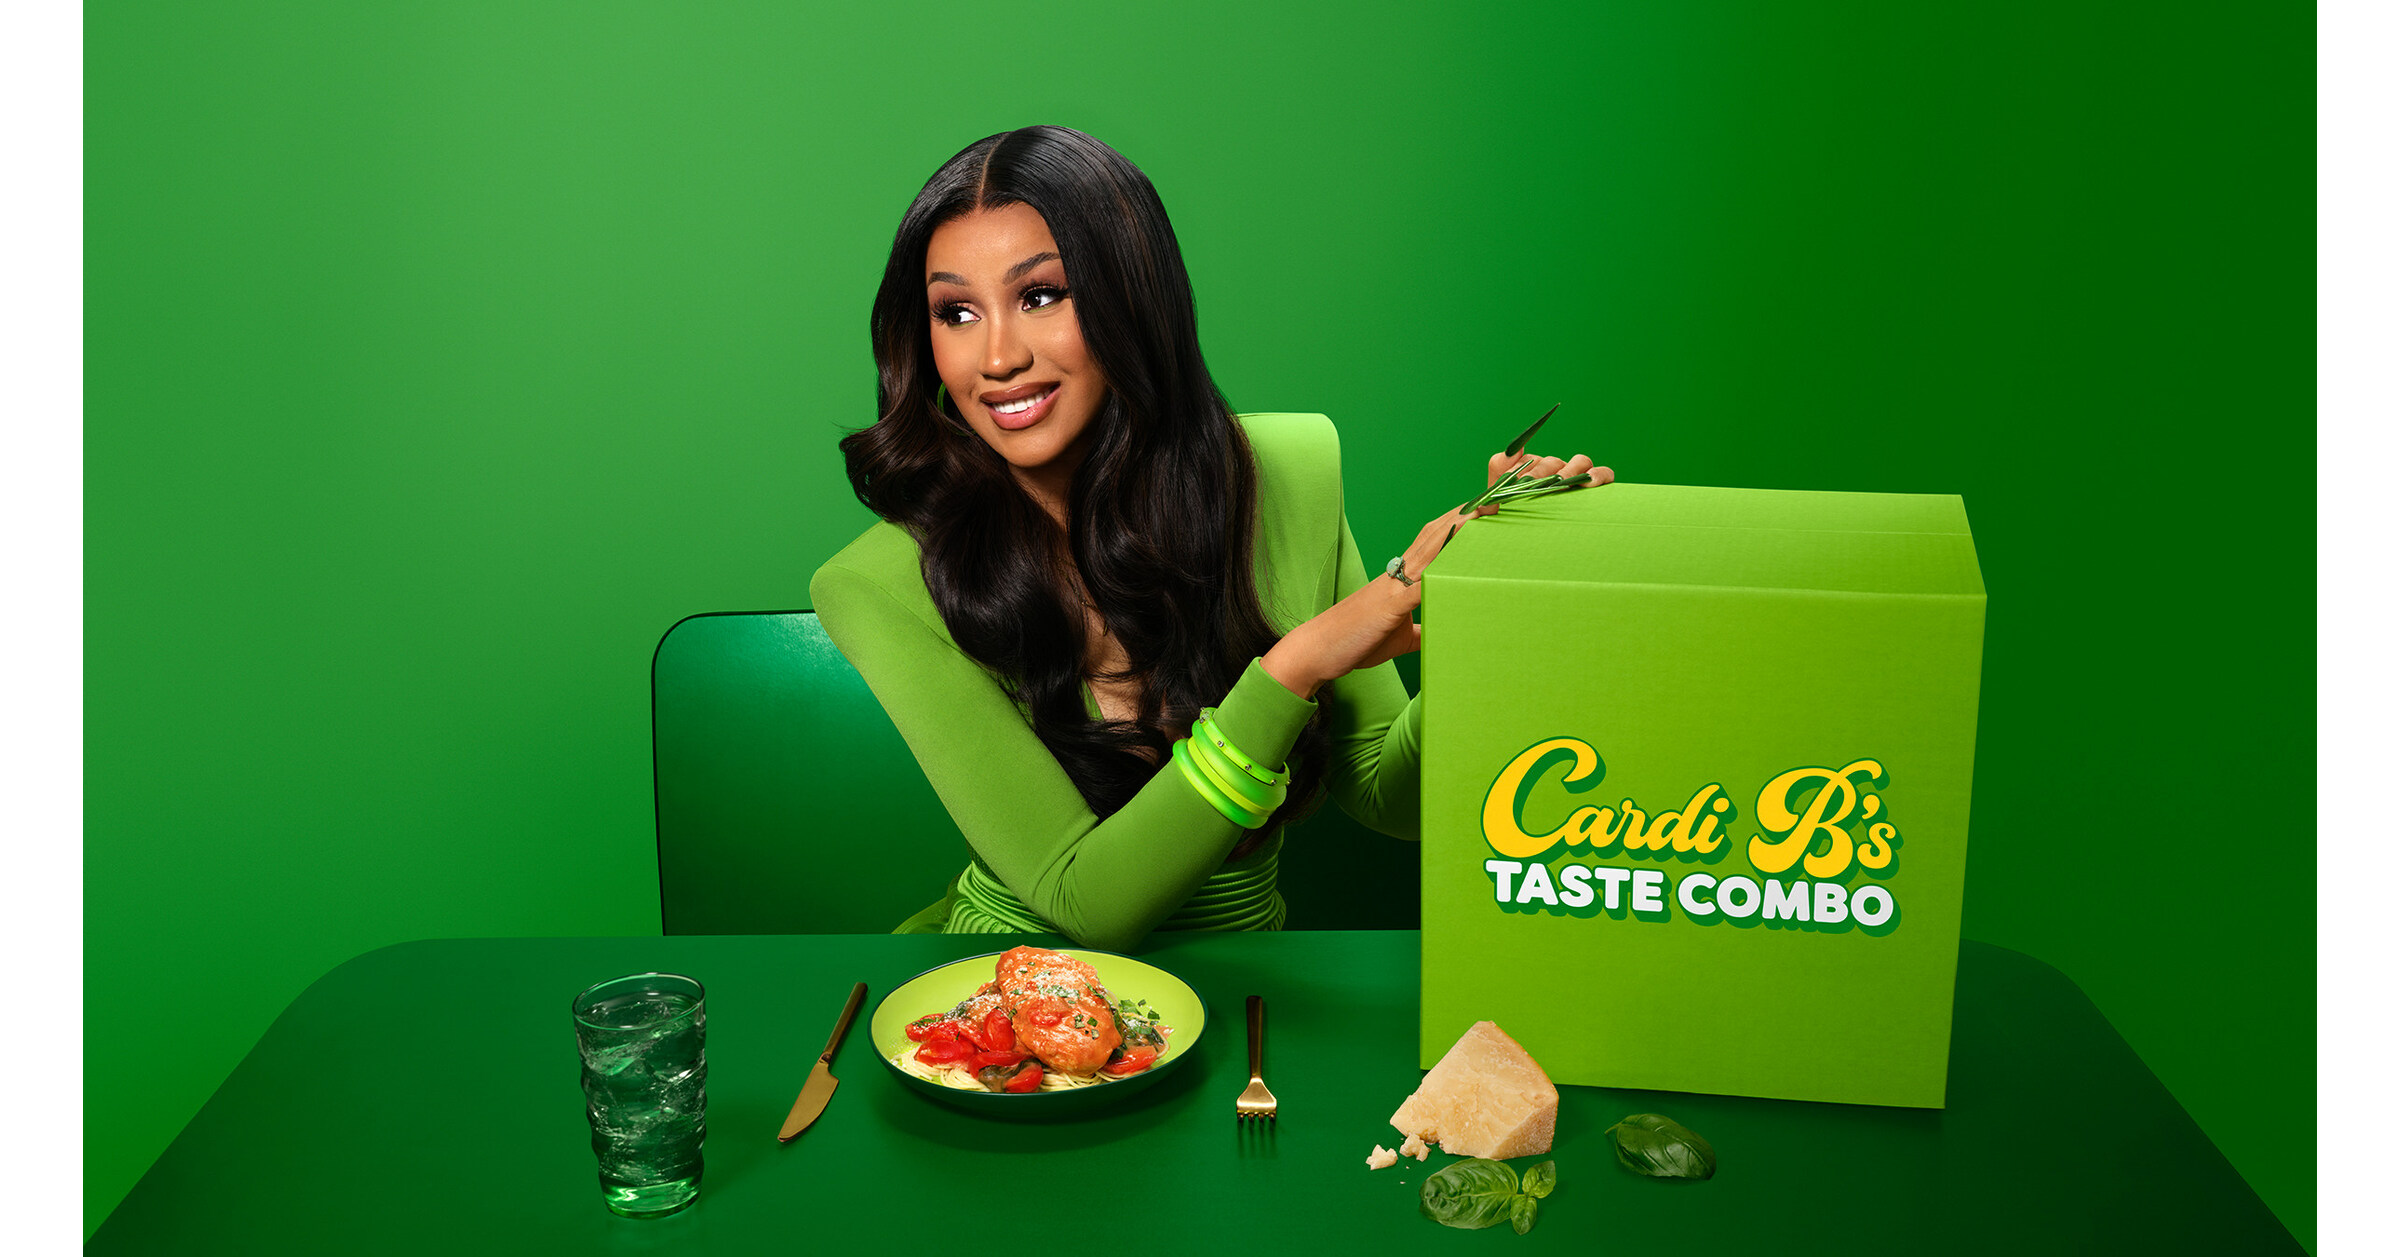 KNORR® AND CARDI B PRESENT TASTE COMBOS: THE NEWEST COMBO MEALS THAT ARE  DELICIOUS, NUTRITIOUS AND EASY TO COOK AT HOME